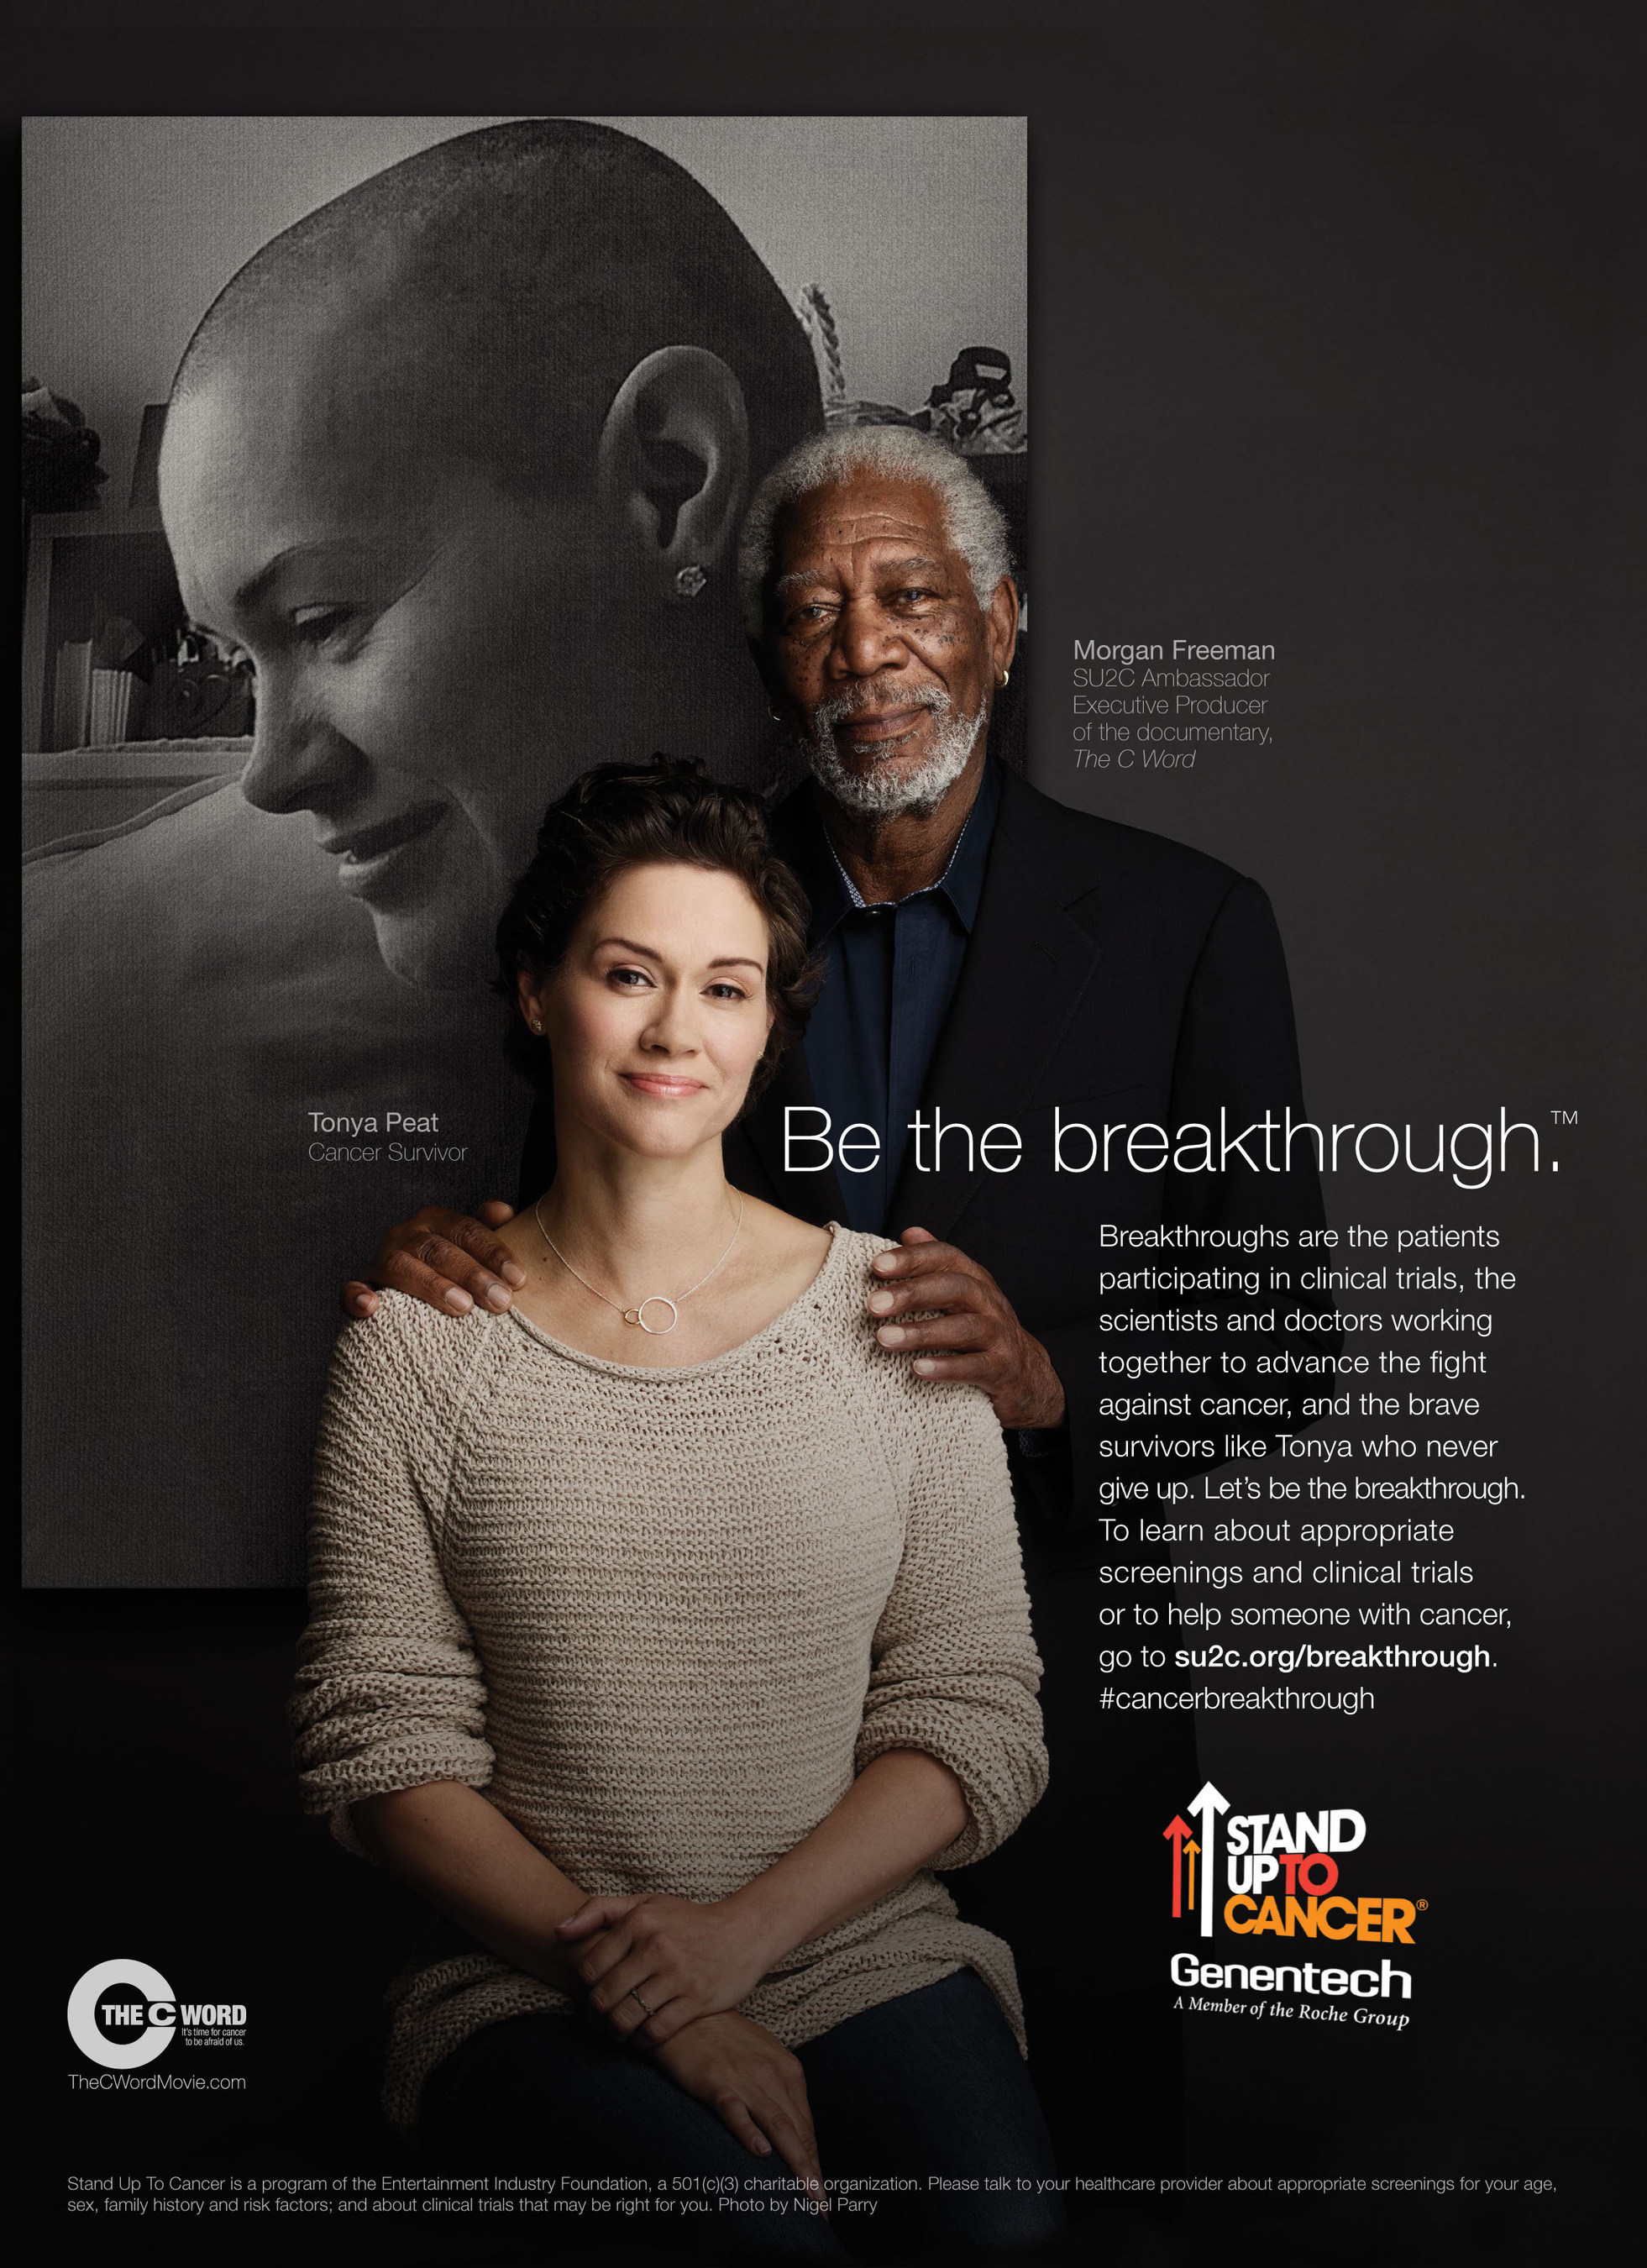 Morgan Freeman Joins Stand Up To Cancer and Genentech in New PSA